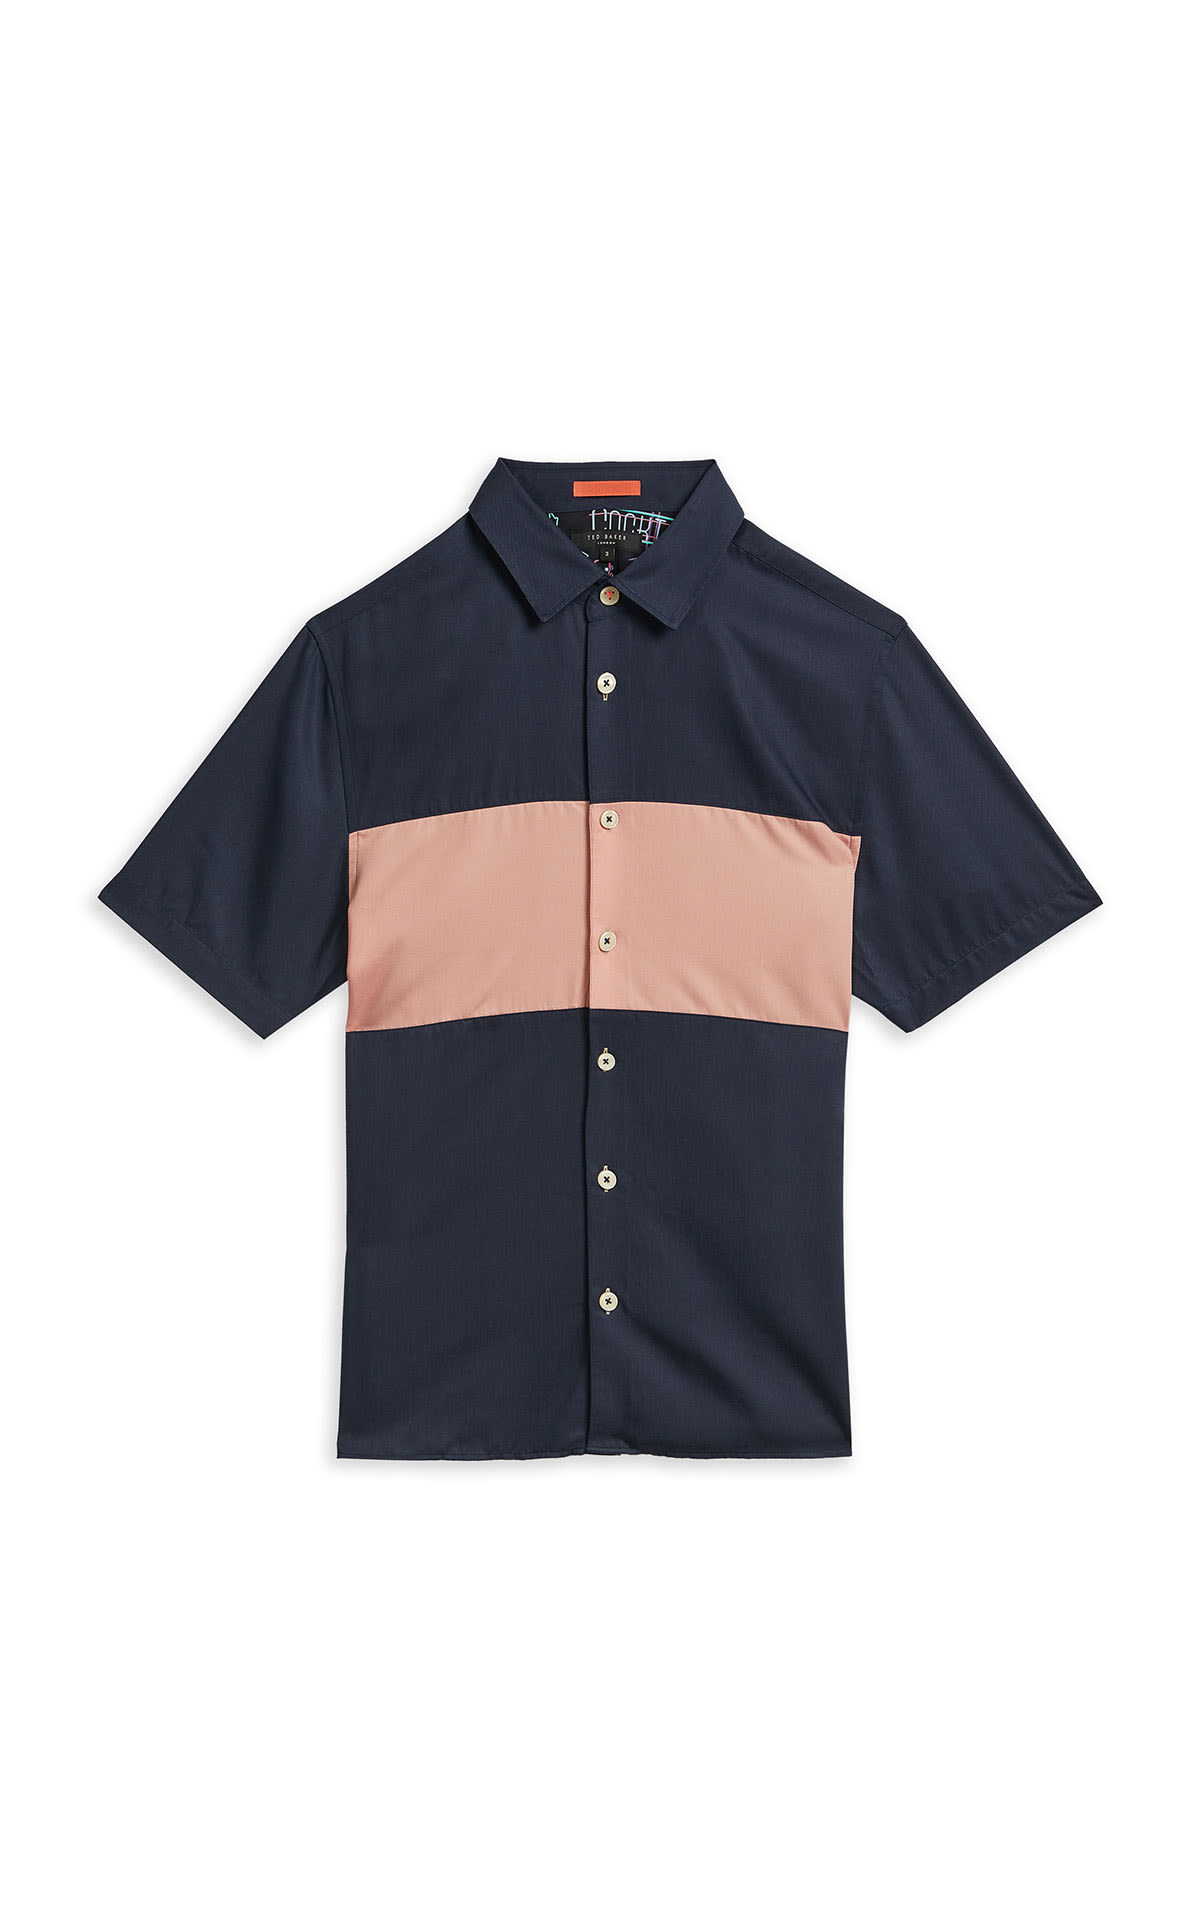 Ted Baker SS colour block shirt from Bicester Village